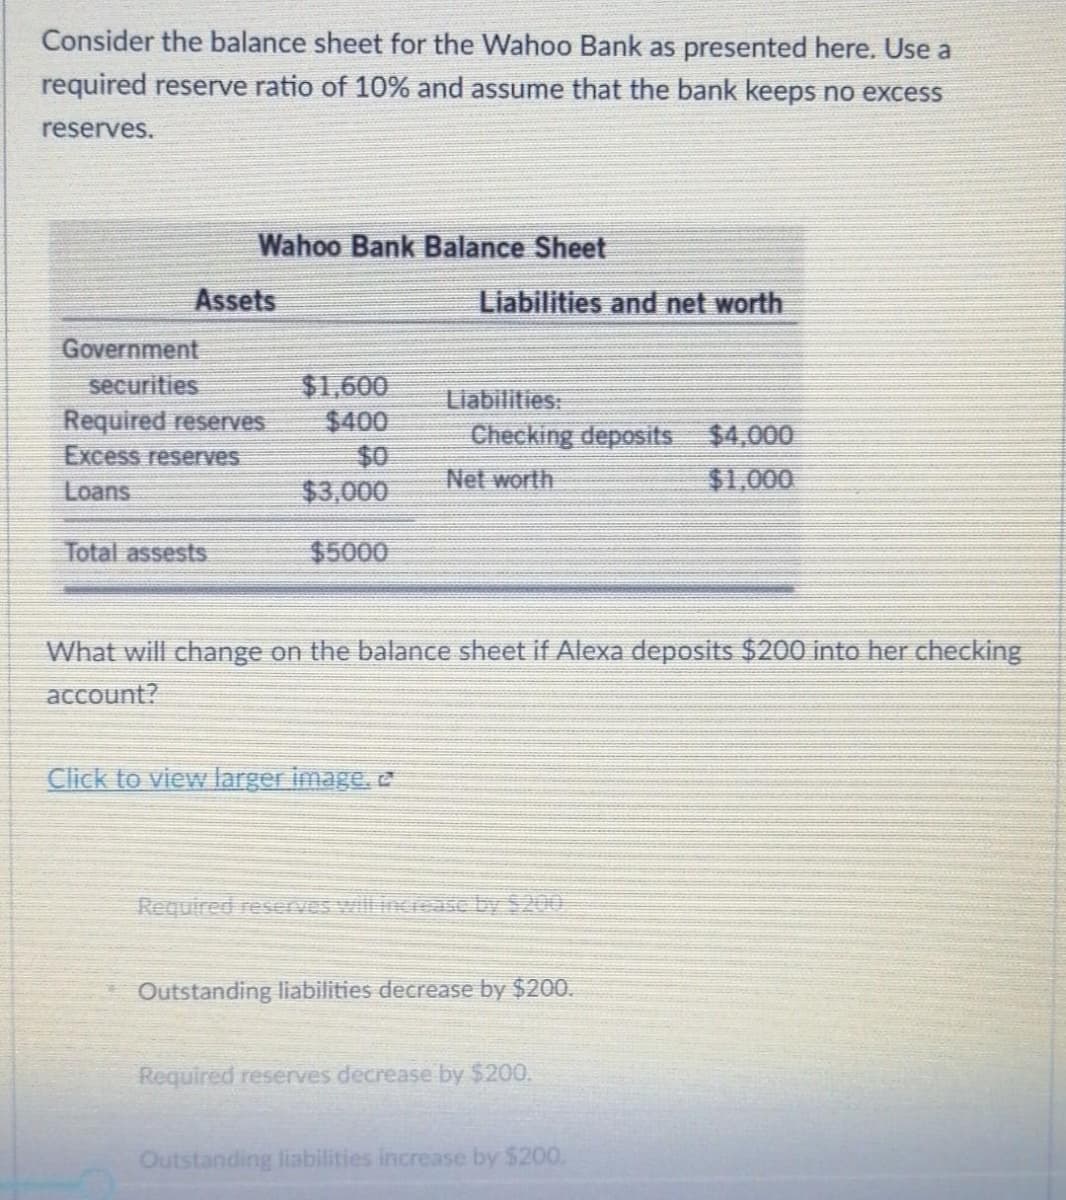 Consider the balance sheet for the Wahoo Bank as presented here. Use a
required reserve ratio of 10% and assume that the bank keeps no excess
reserves.
Wahoo Bank Balance Sheet
Assets
Liabilities and net worth
Government
securities
Required reserves
Excess reserves
$1,600
$400
$0
$3,000
Liabilities:
Checking deposits
$4,000
Net worth
$1,000
Loans
Total assests
$5000
What will change on the balance sheet if Alexa deposits $200 into her checking
account?
Click to view larger image, e
Required reserves will nciatc by $200.
Outstanding liabilities decrease by $200.
Required reserves decrease by $200.
Outstanding liabilities increase by $200.
